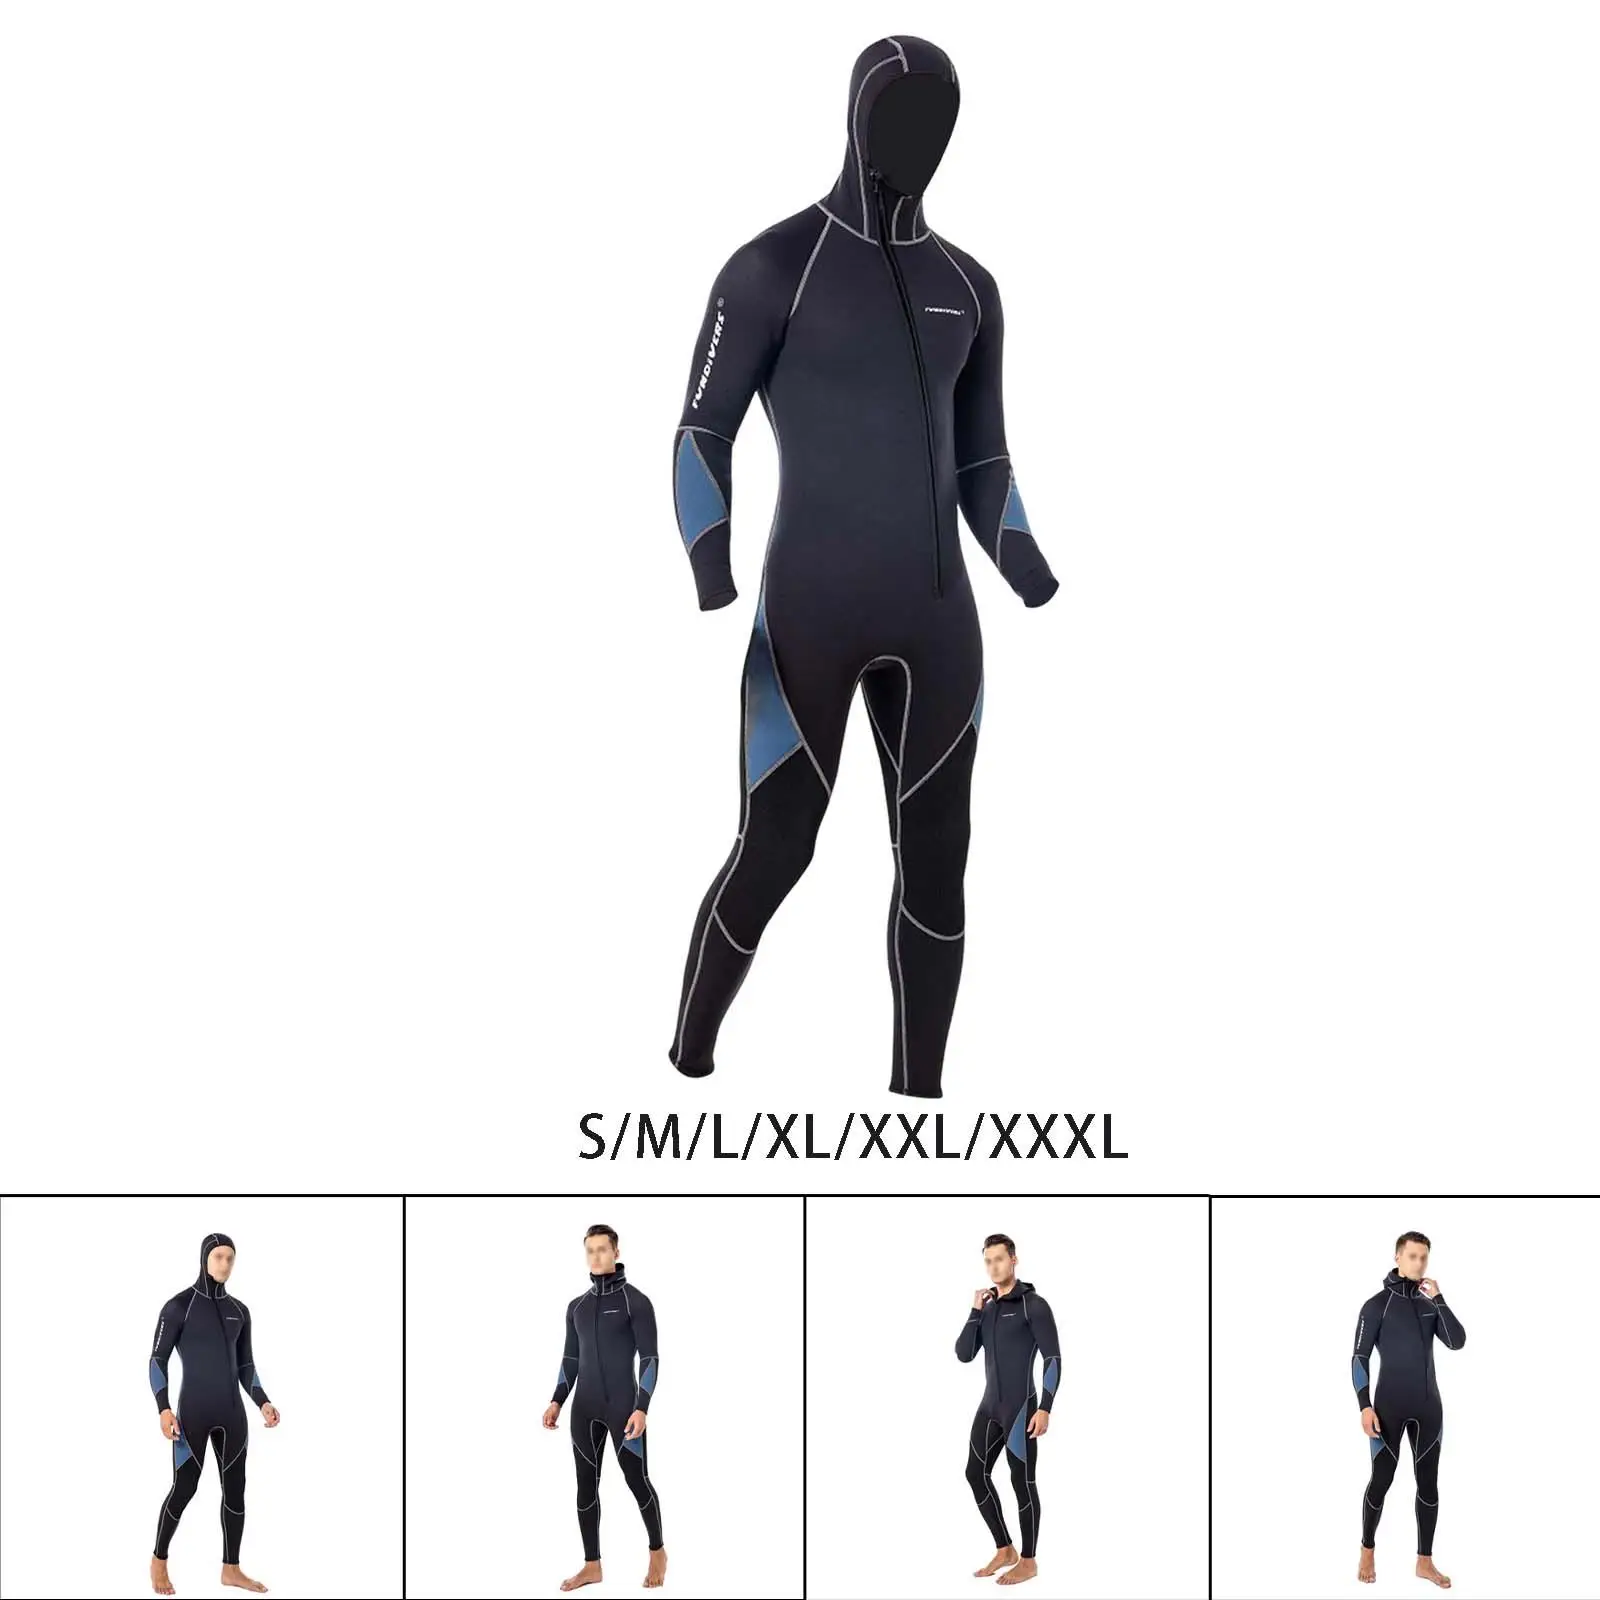 shopsuntek Full Body Wetsuit Gray Protective Comfortable 3mm Hooded Wetsuit for